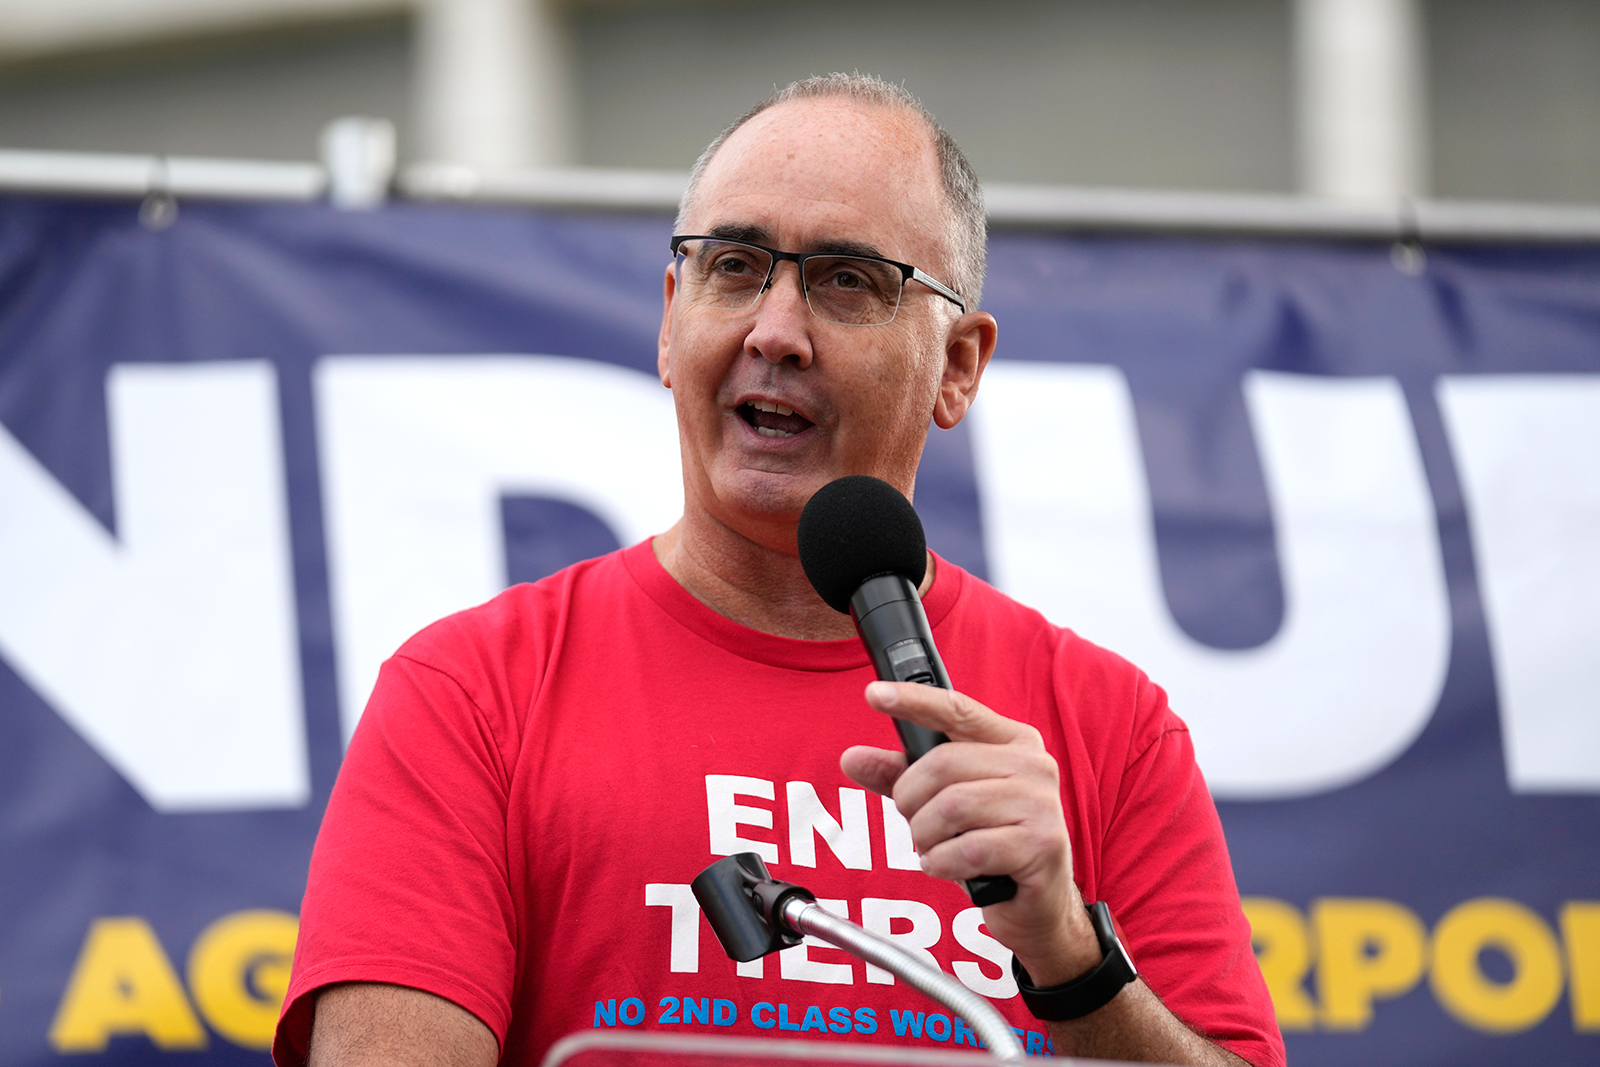 United Auto Workers President Shawn Fain speaks at a rally in Detroit, Michigan, on Friday, September 15. 